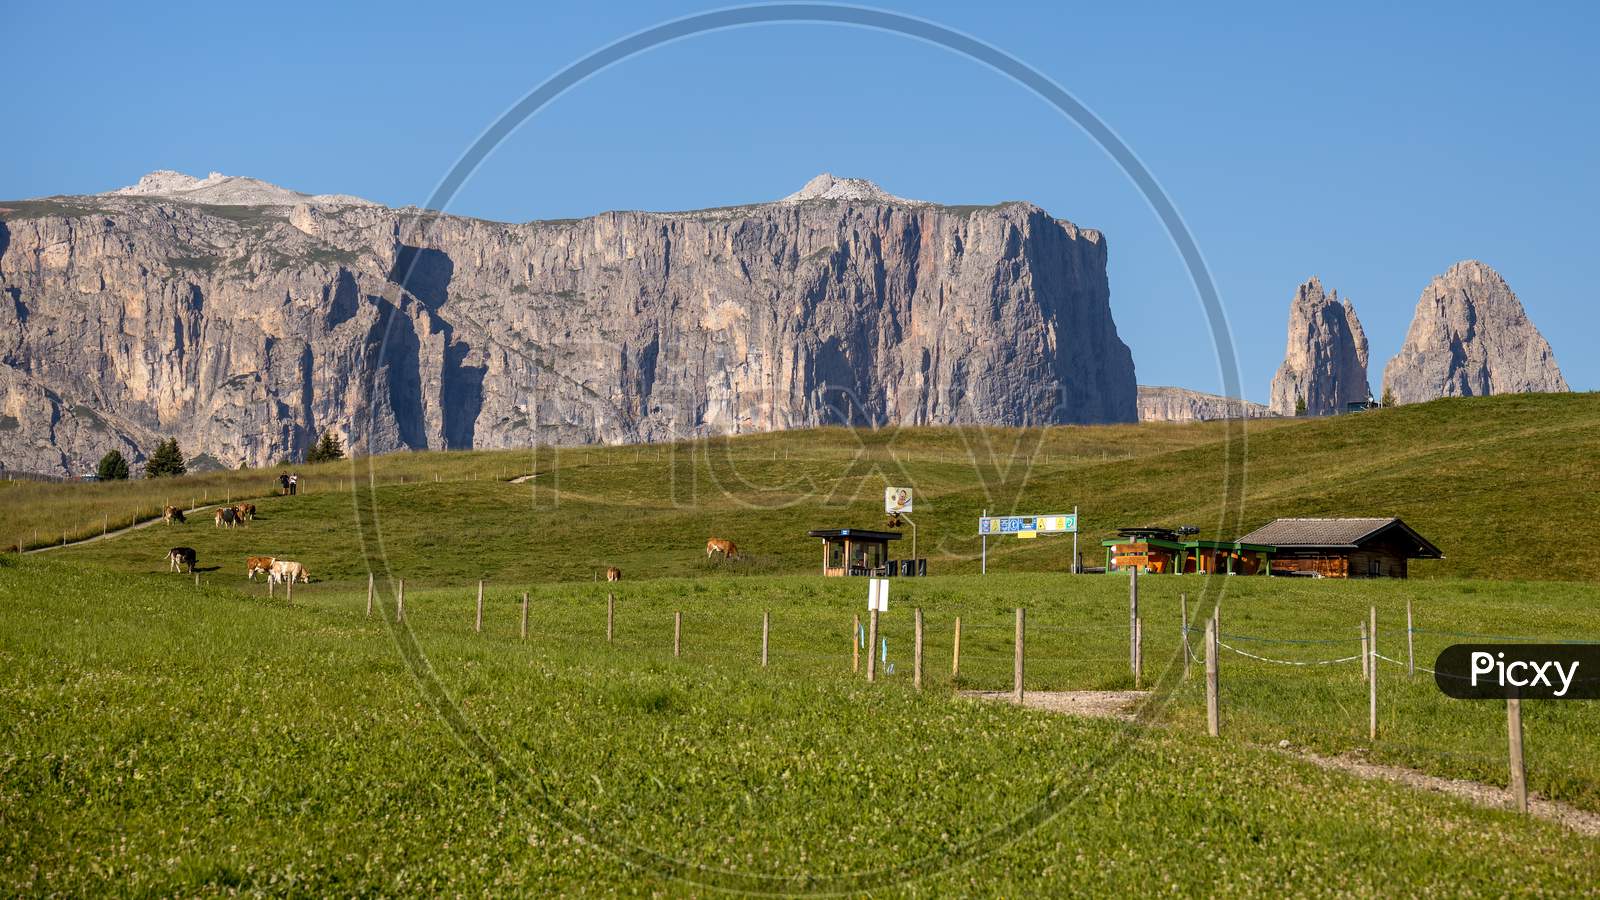 Fie Allo Sciliar, South Tyrol/Italy - August 8 : View Of The Countryside By The Sciliar Mountain Range, Dolomites, South Tyrol, Italy On August 8, 2020